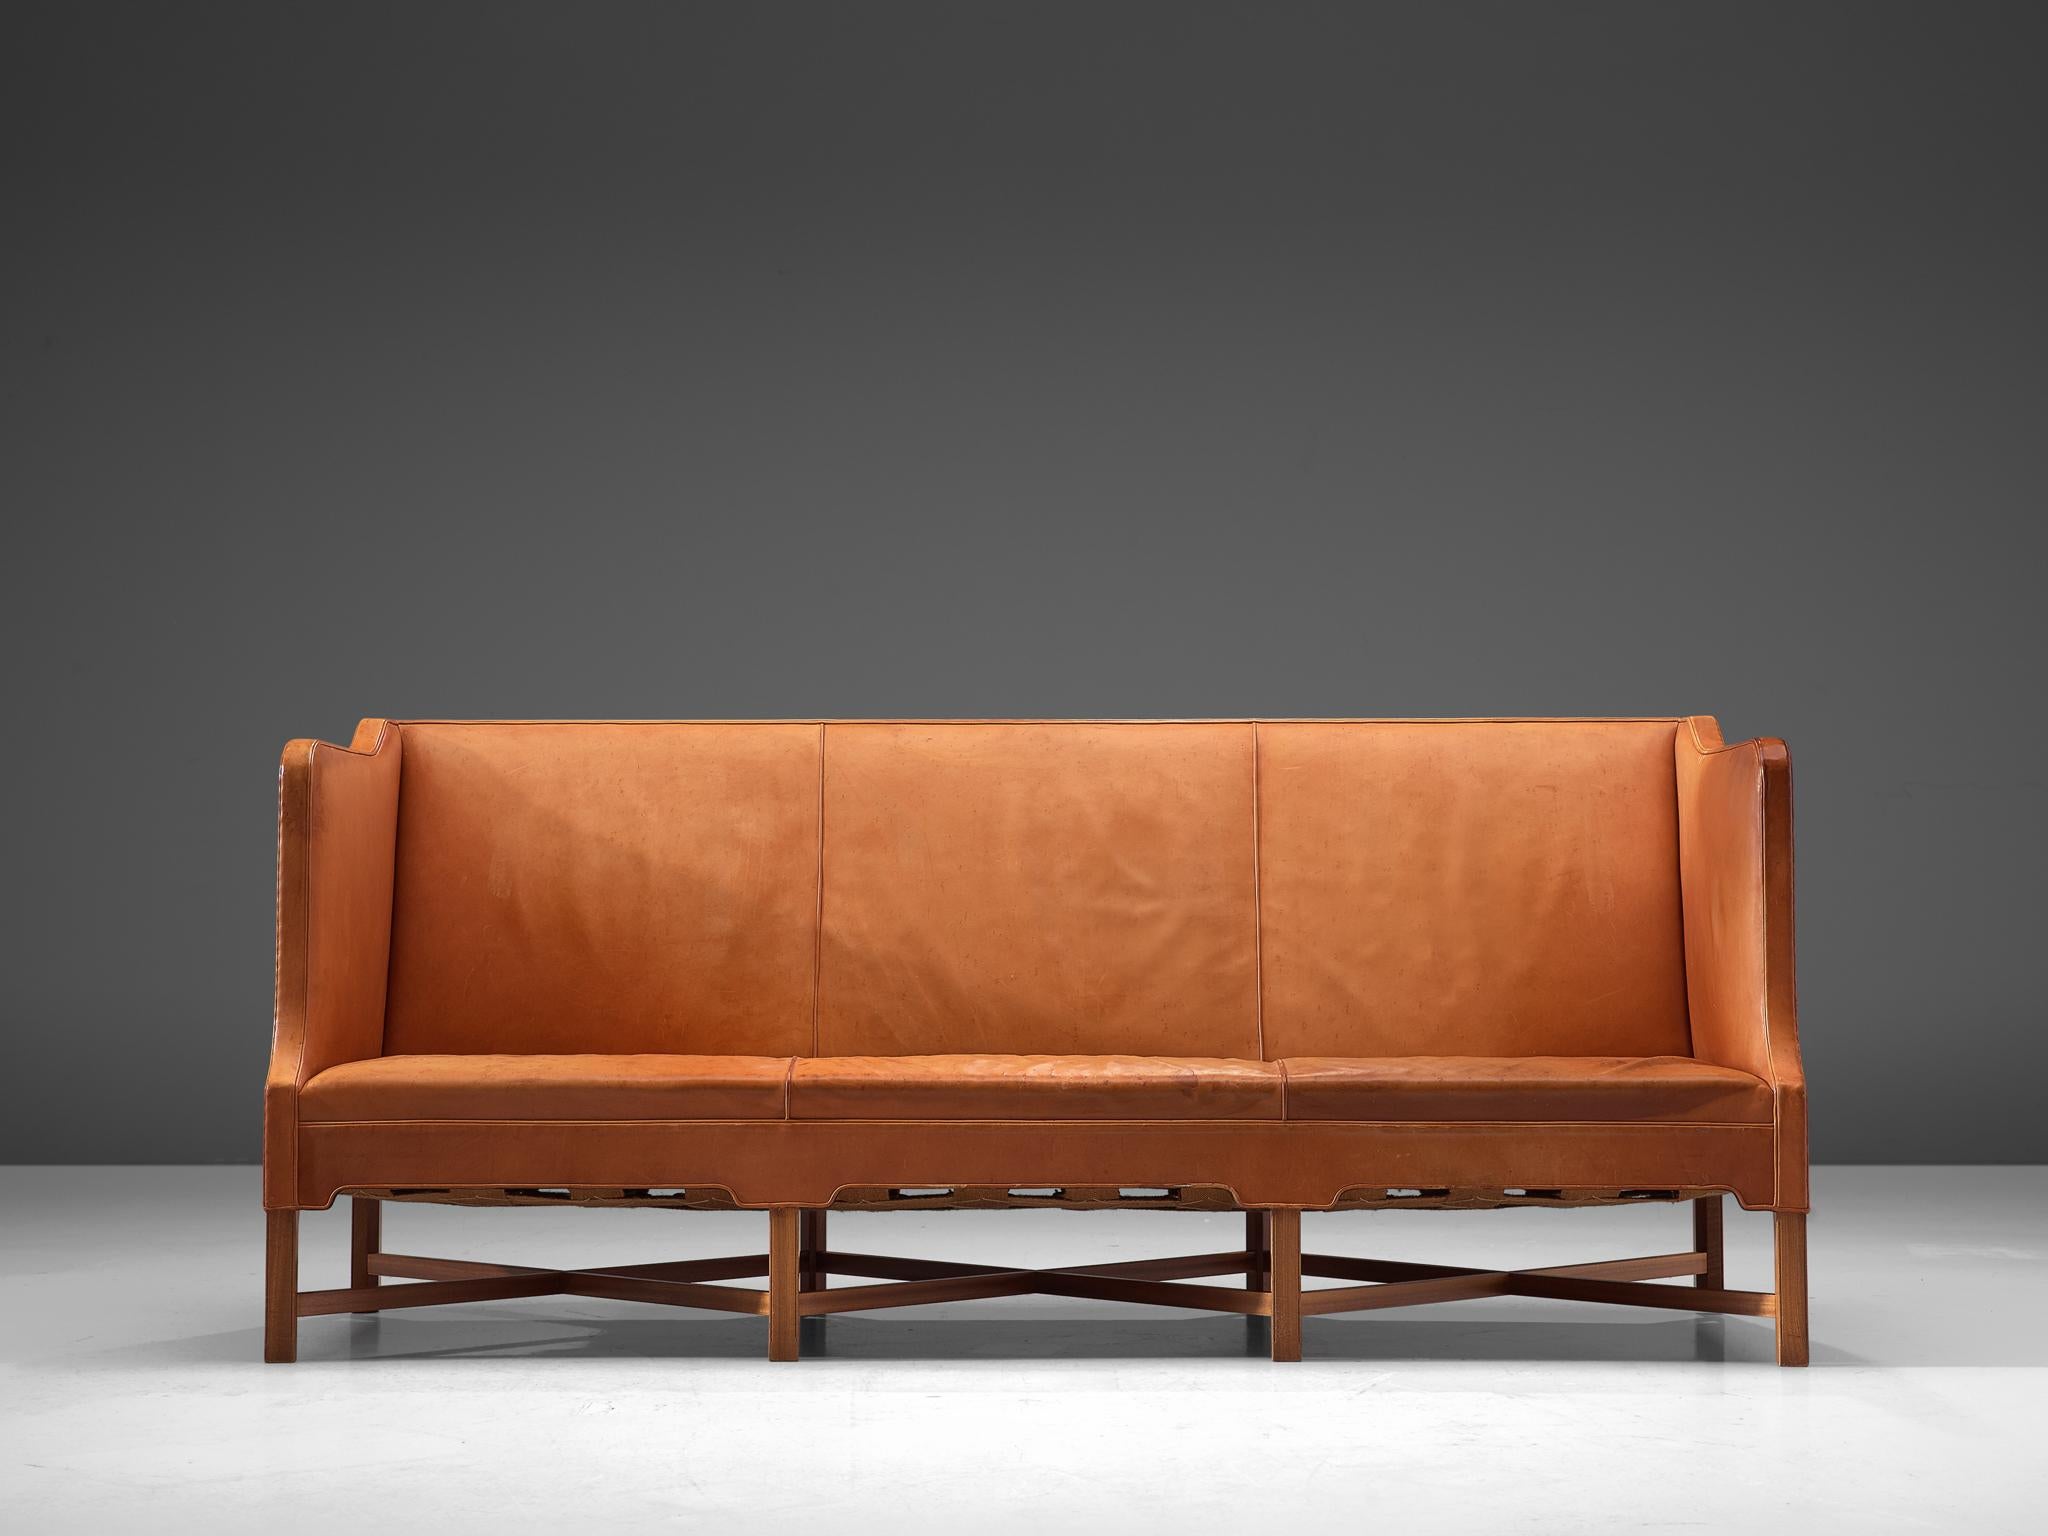 Kaare Klint for Rud Rasmussen, sofa model 4118, in leather and mahogany, by Denmark, 1929, made in 1950s.

Classic and elegant Scandinavian three-seat sofa by Kaare Klint. This model was designed in 1929. The base consist of eight legs in mahogany